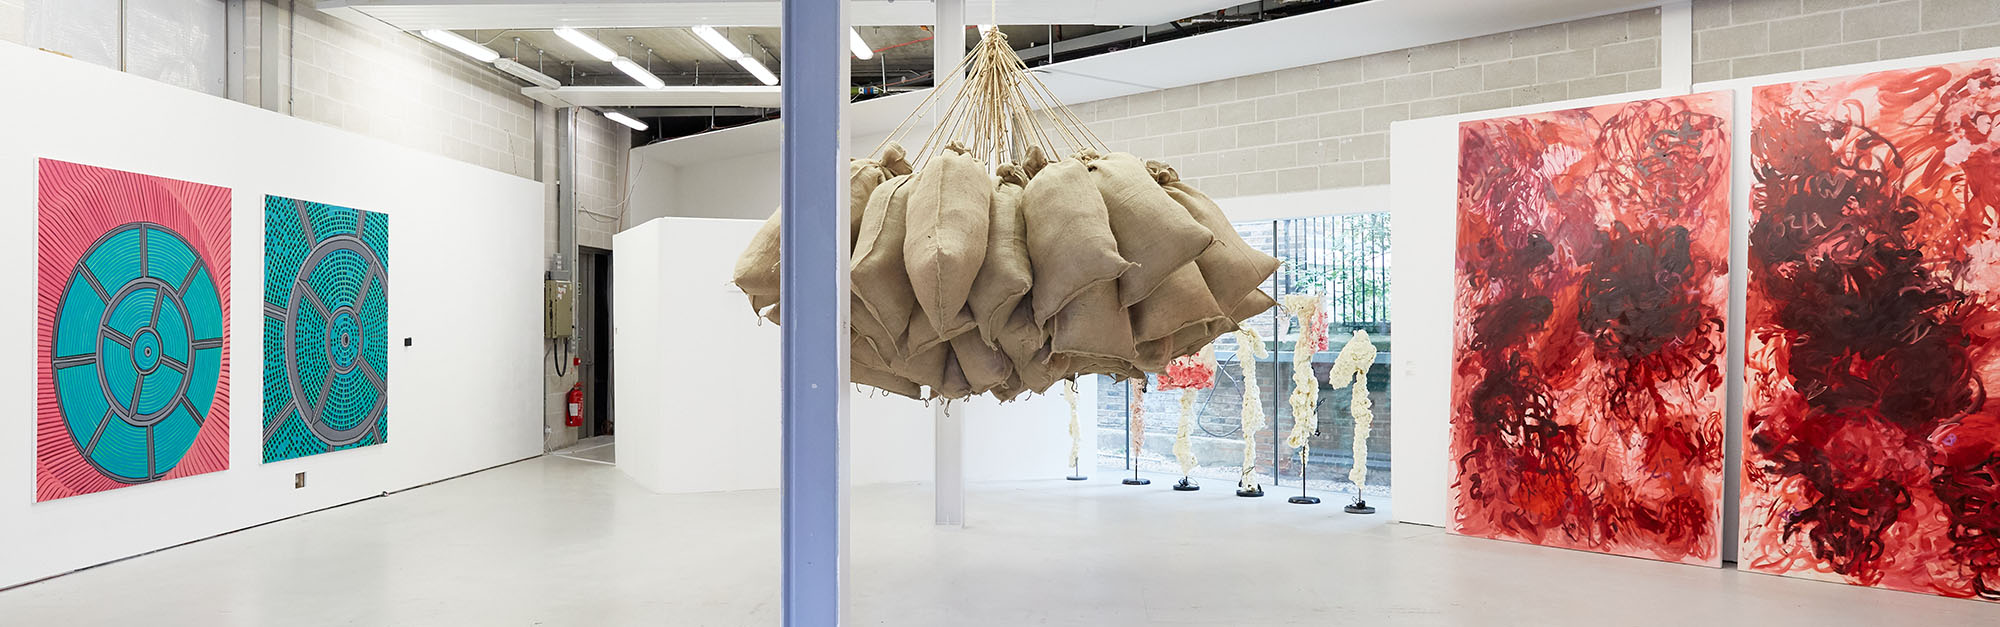 Two sets of paintings and a sculpture of hanging sacks from the ceiling as part of the MA Fine Art Summer Show